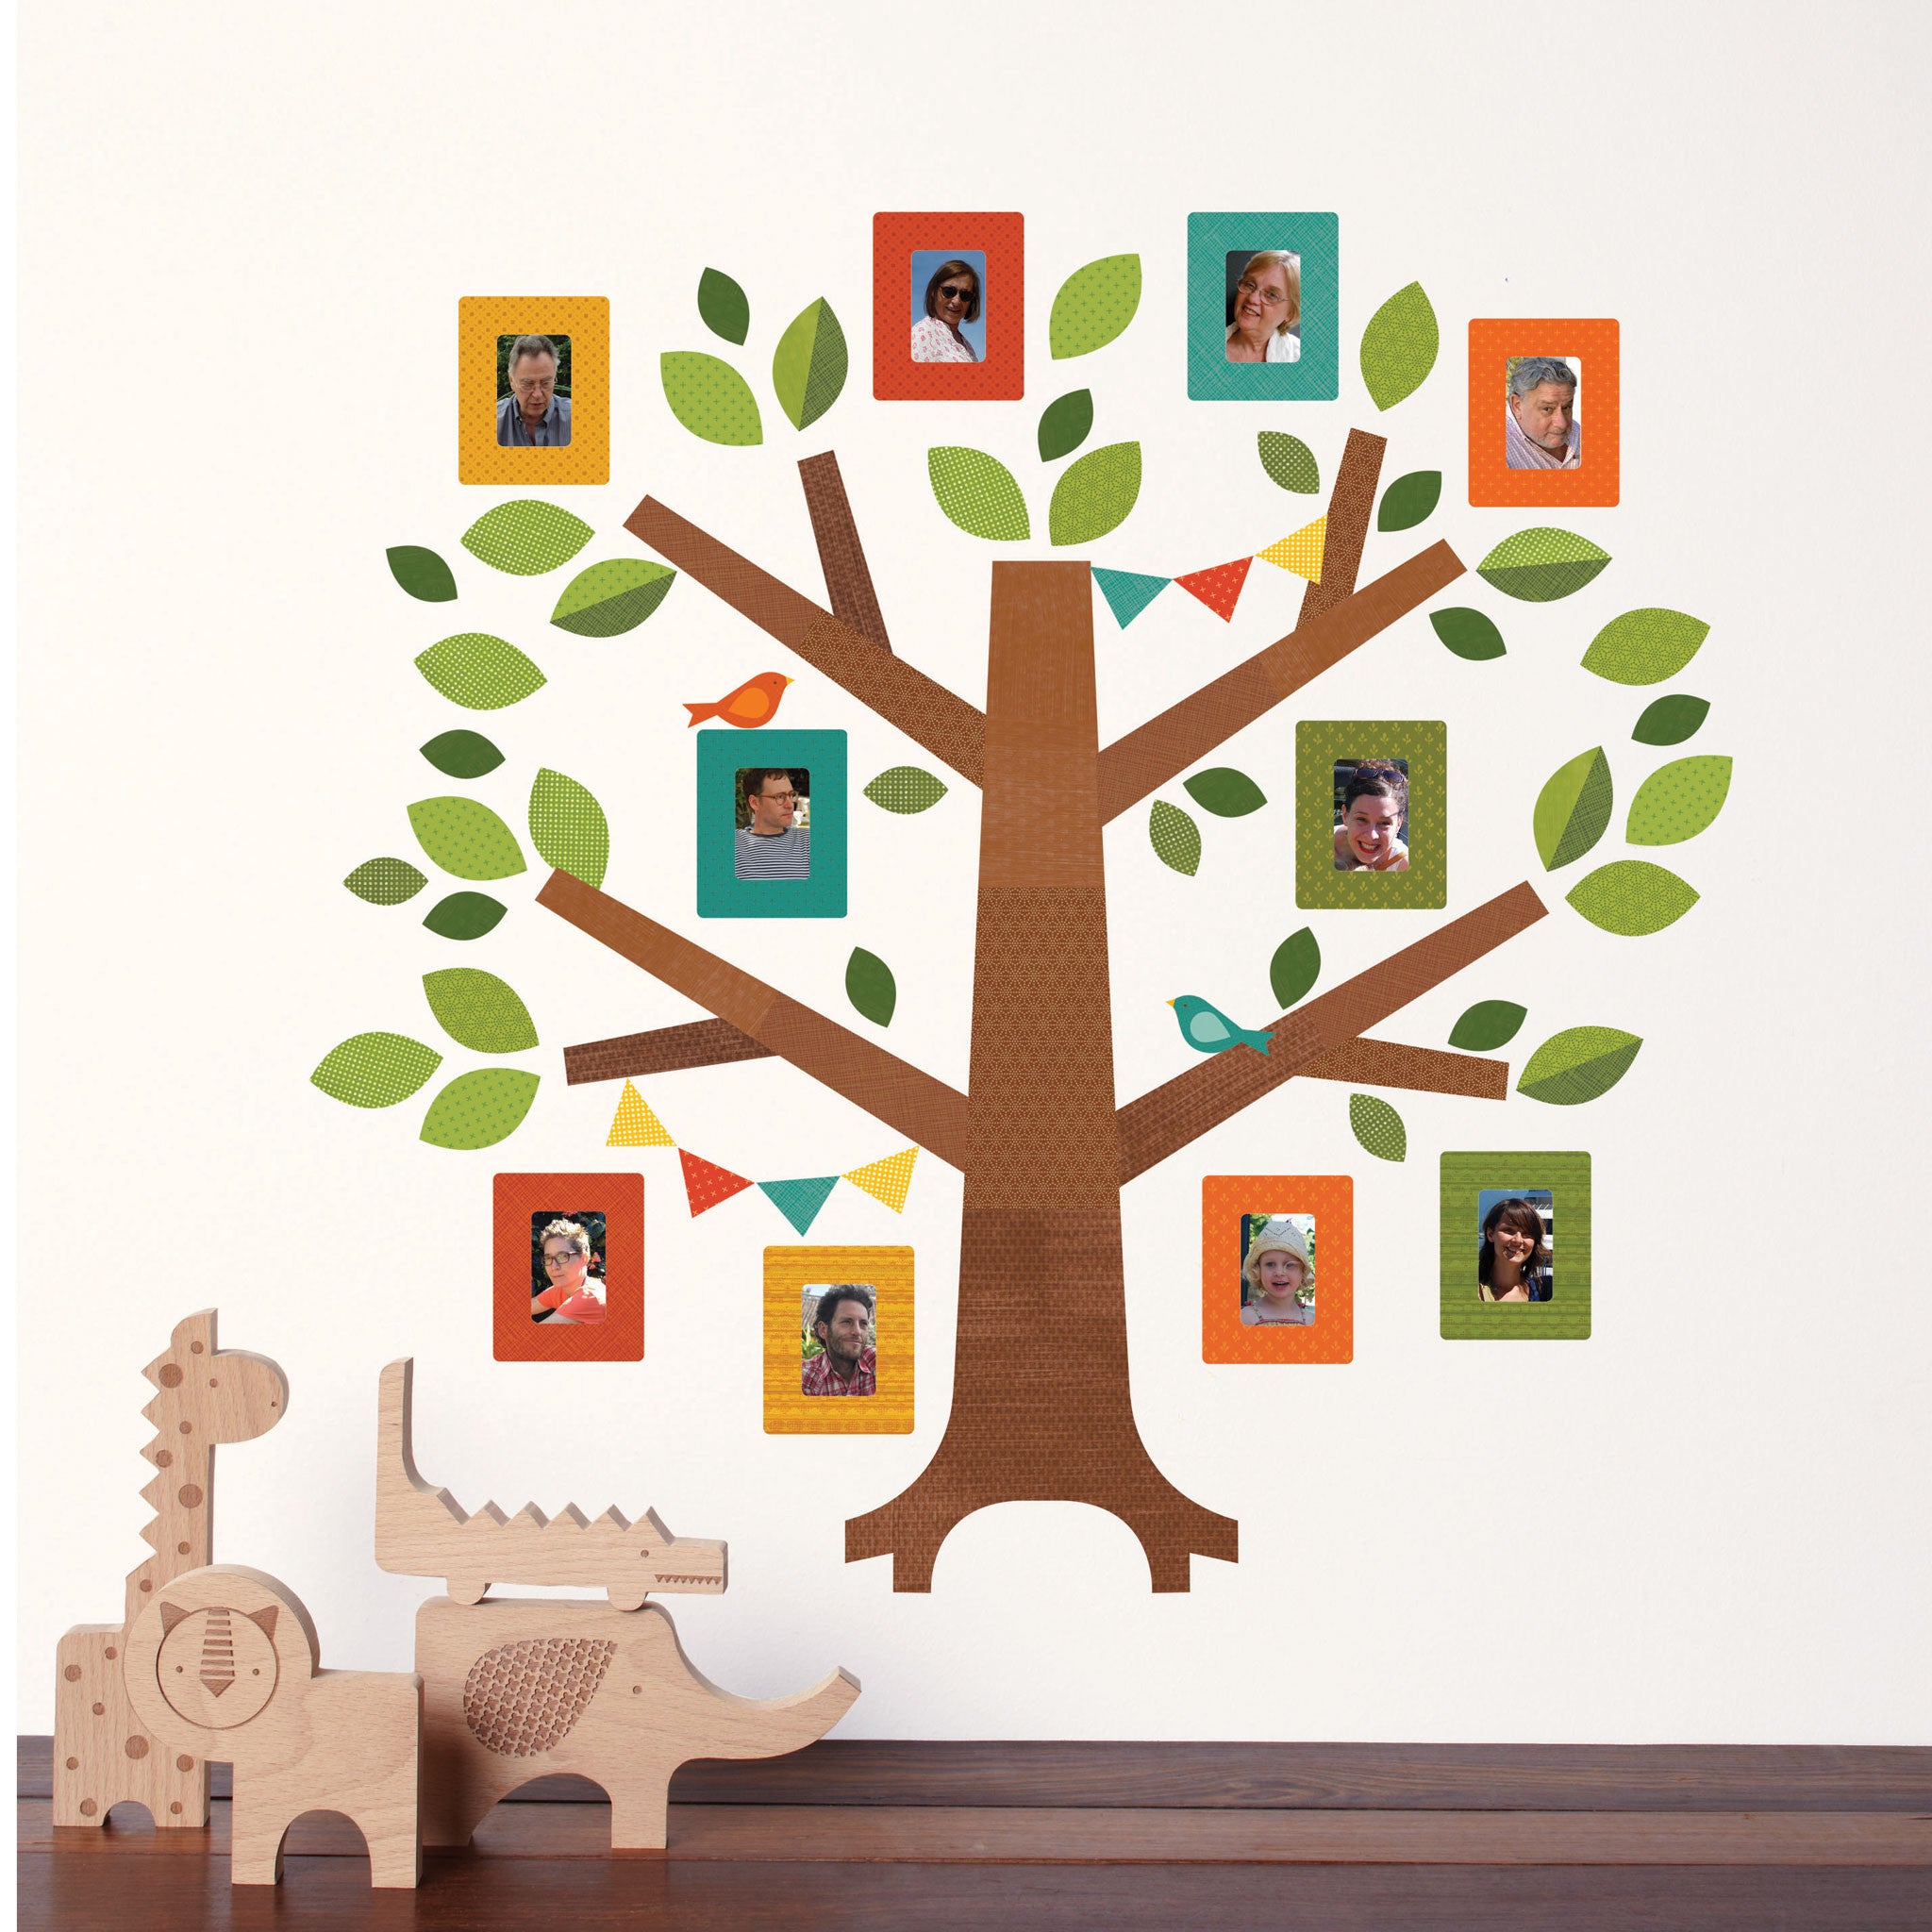 Family Tree Wall Decal | WallDecals.com